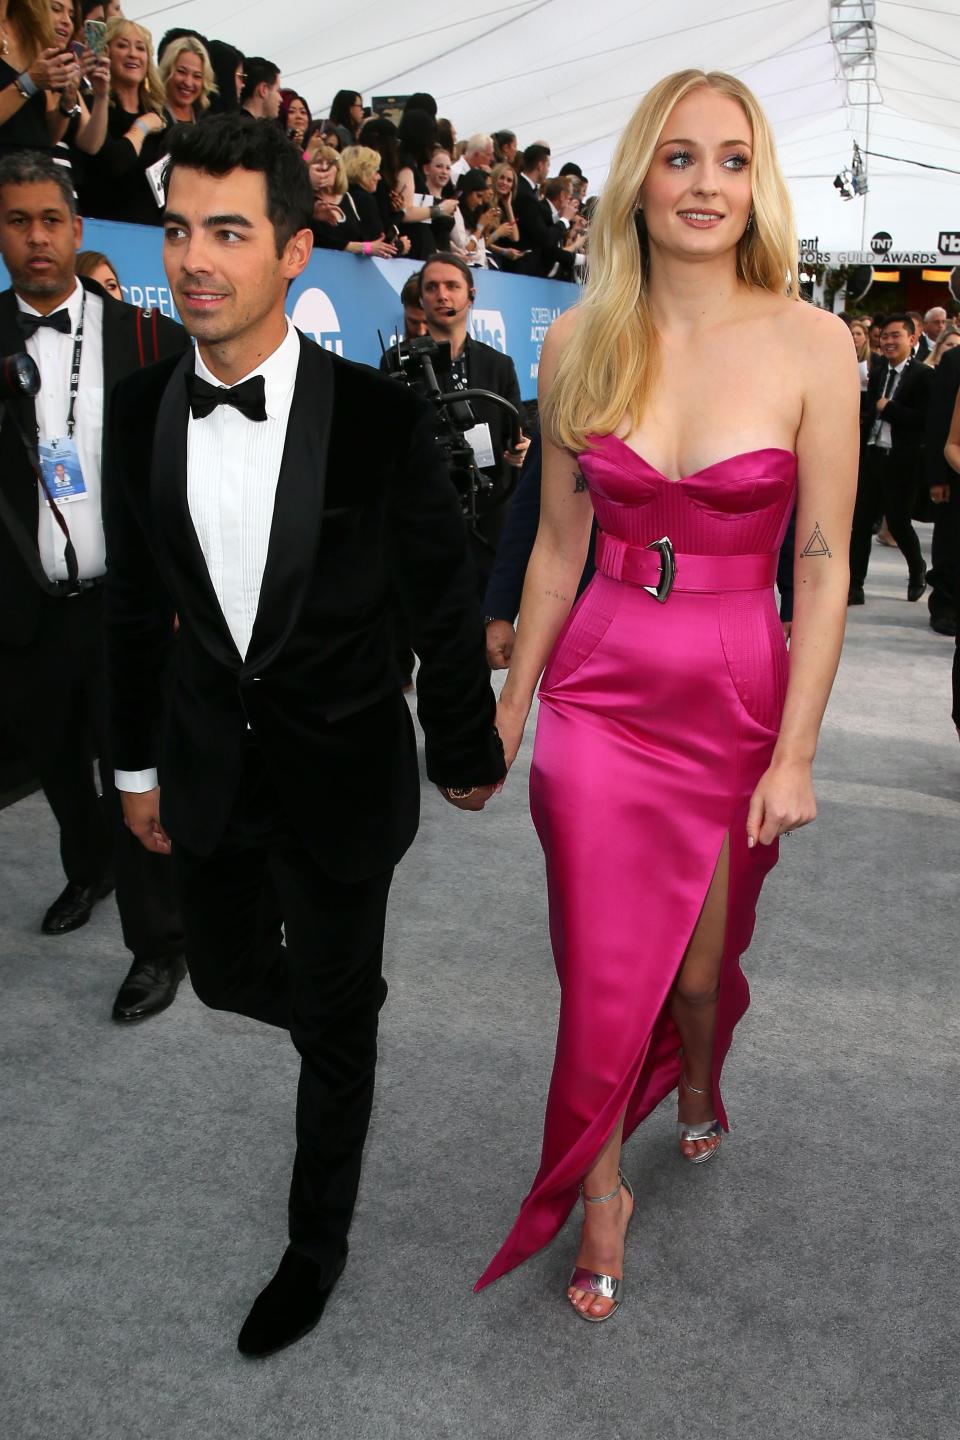 Sophie Turner and Joe Jonas arrive for the 26th Annual Screen Actors Guild Awards. (Photo: JEAN-BAPTISTE LACROIX via Getty Images)